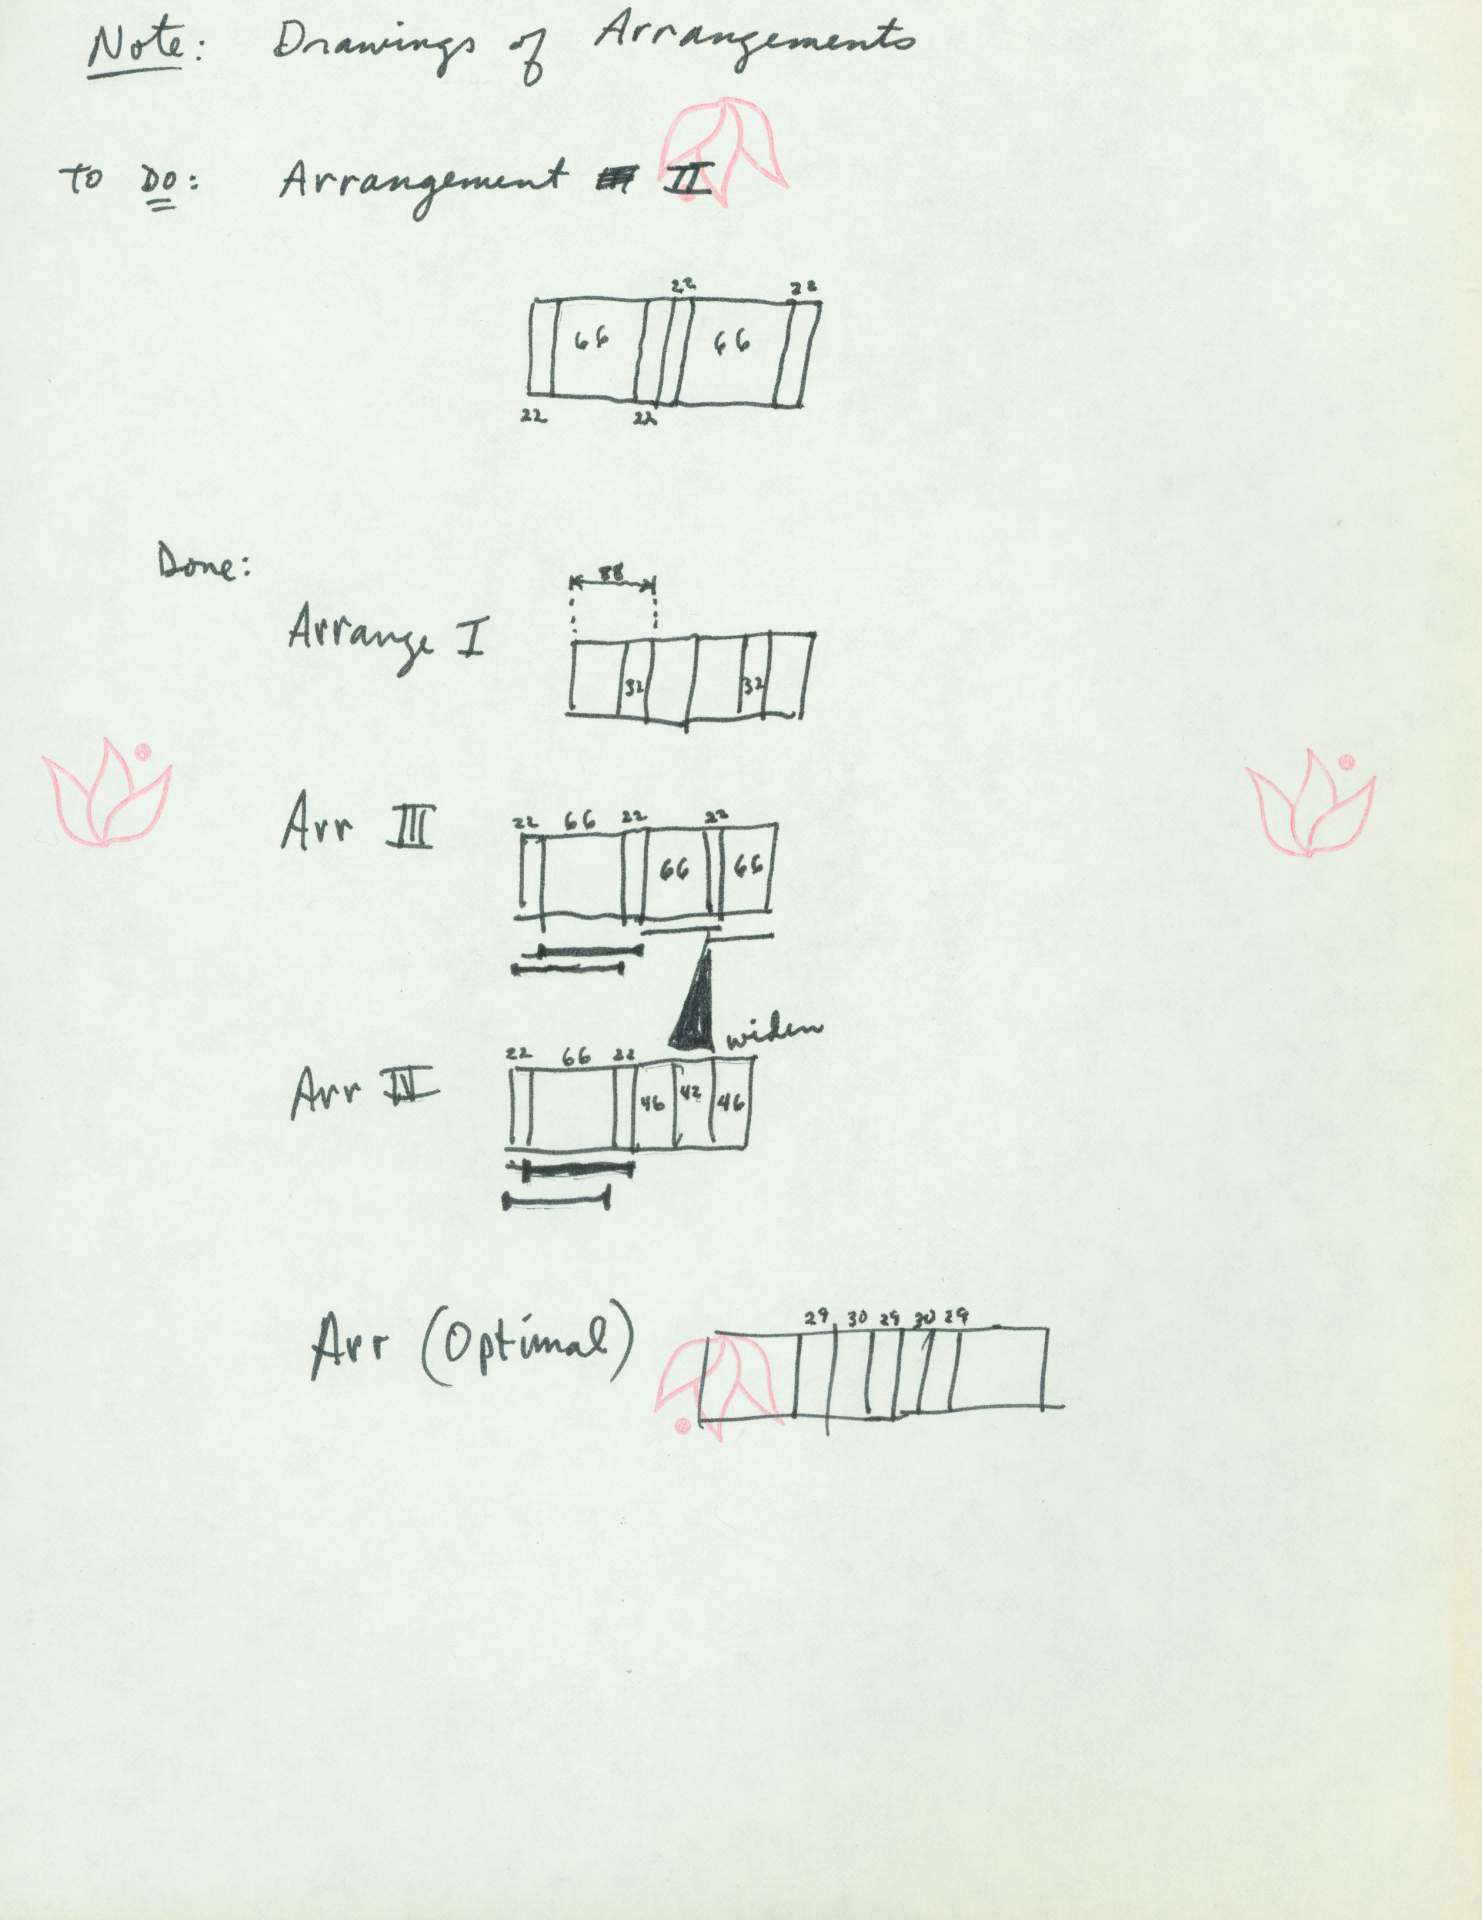 Untitled (Notes: Drawings of Arrangements)